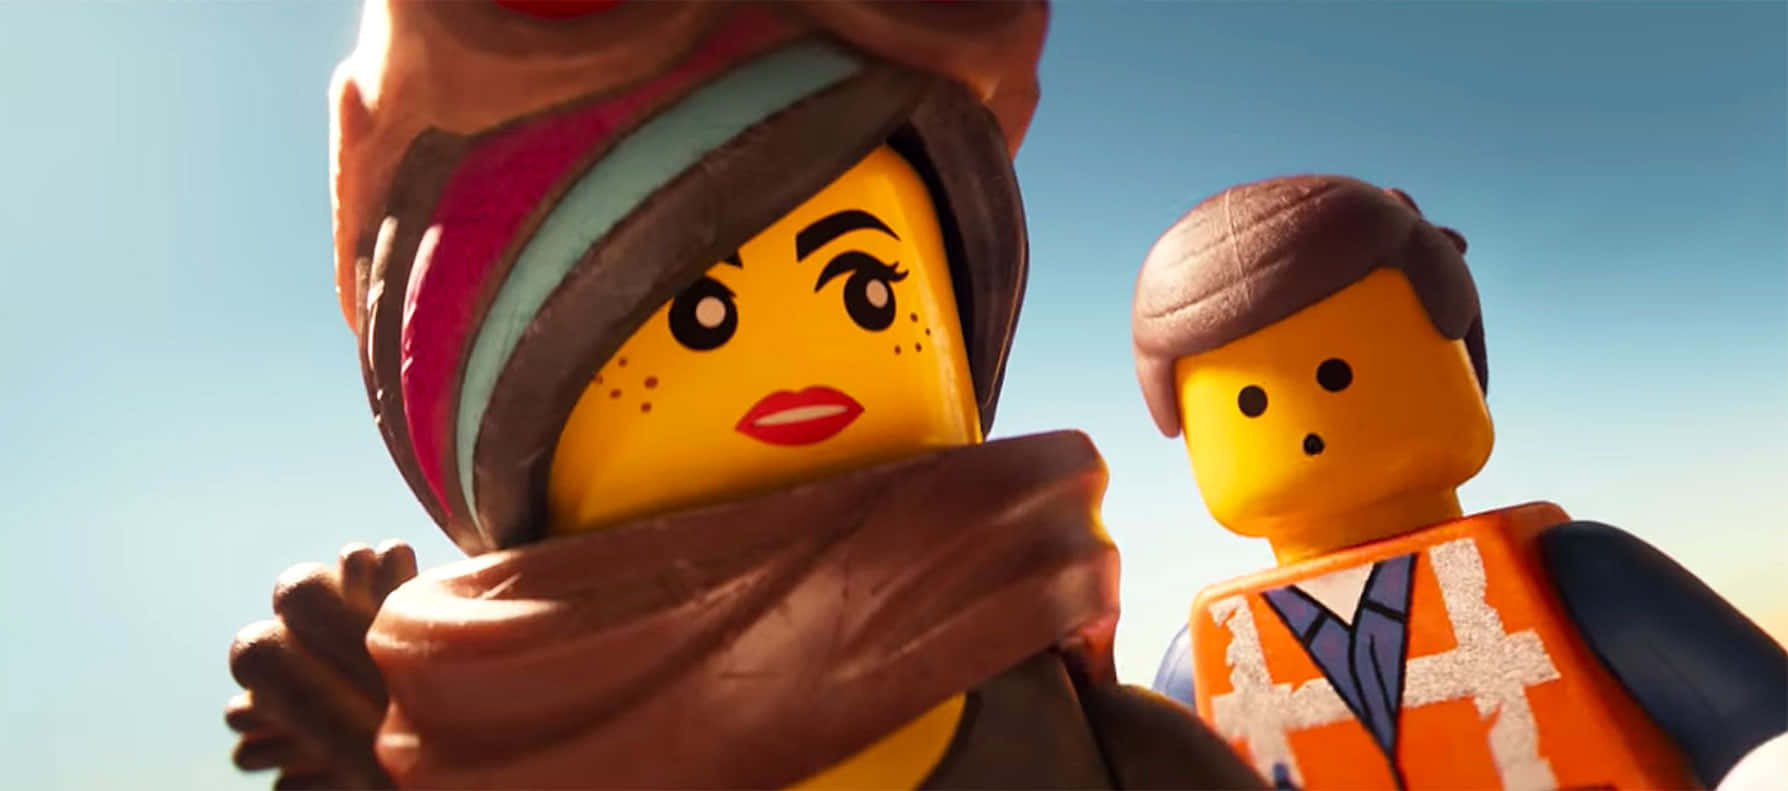 Main Characters From The Lego Movie 2: The Second Part In Action Wallpaper